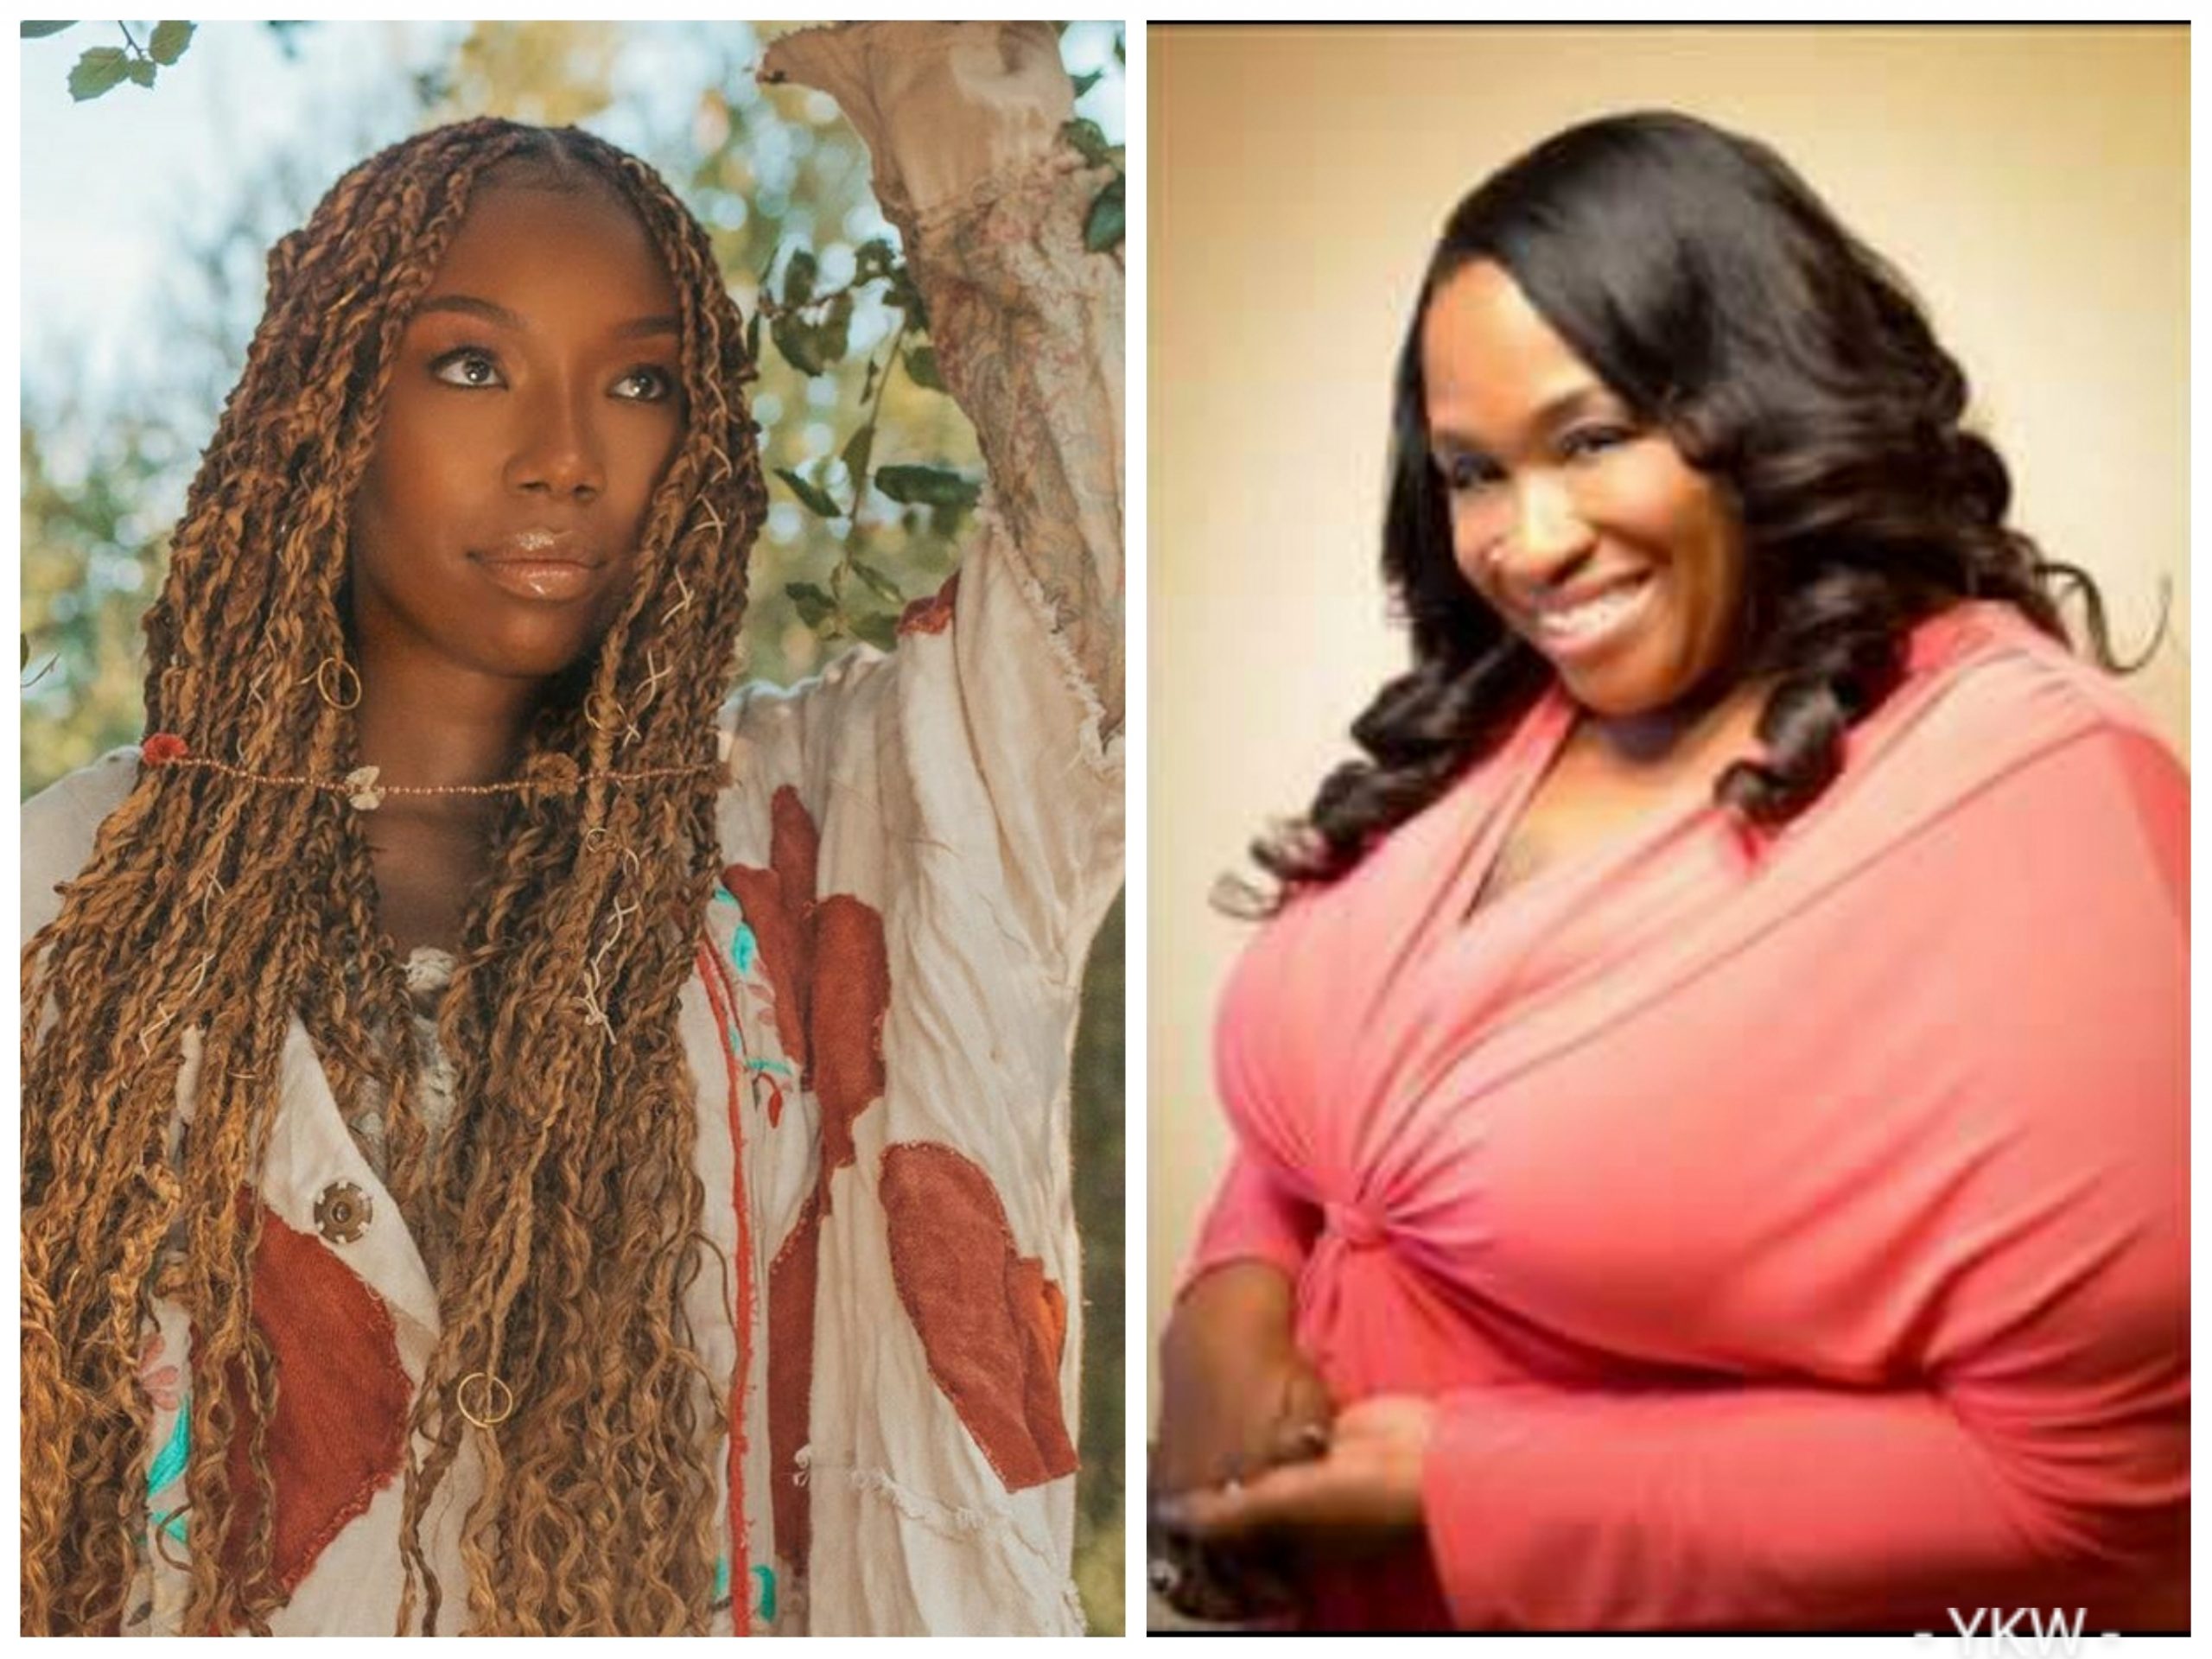 Brandy Responds To Thea Vidale Claims That She Was Disrespect: “She’s Just A Little Bitter”